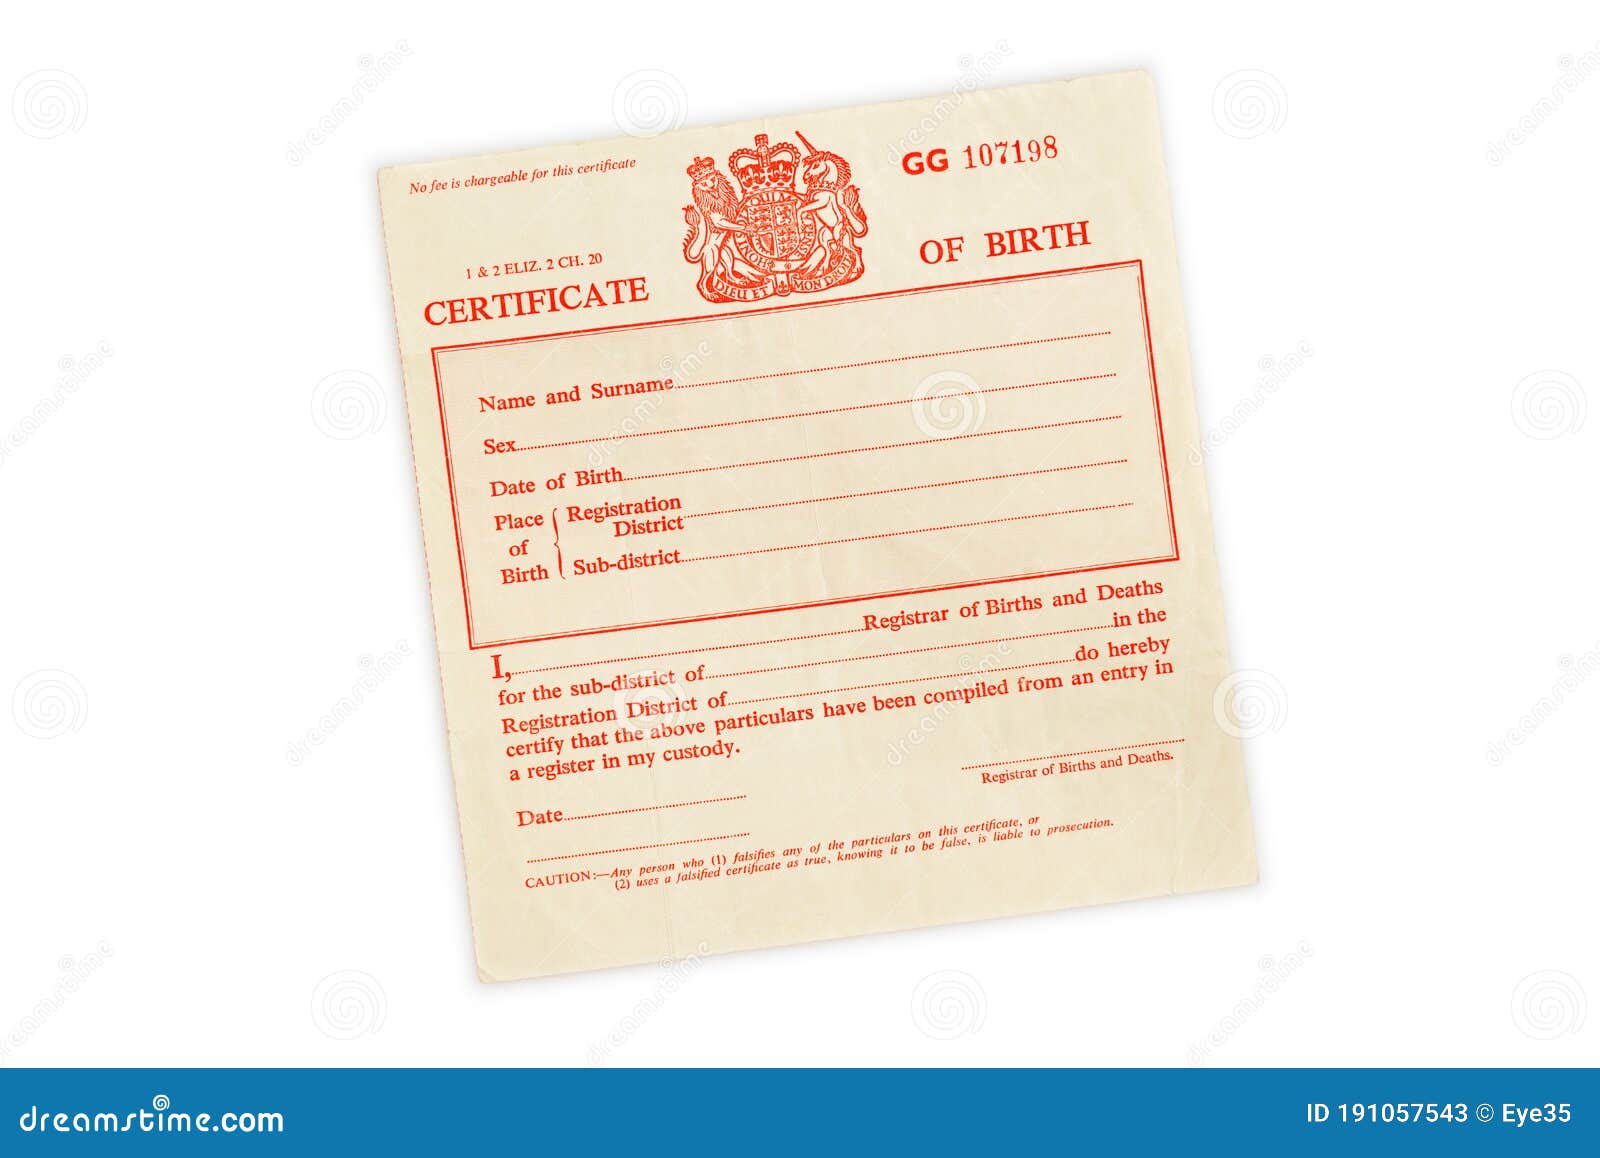 374 Birth Certificate Photos Free Royalty Free Stock Photos From Dreamstime